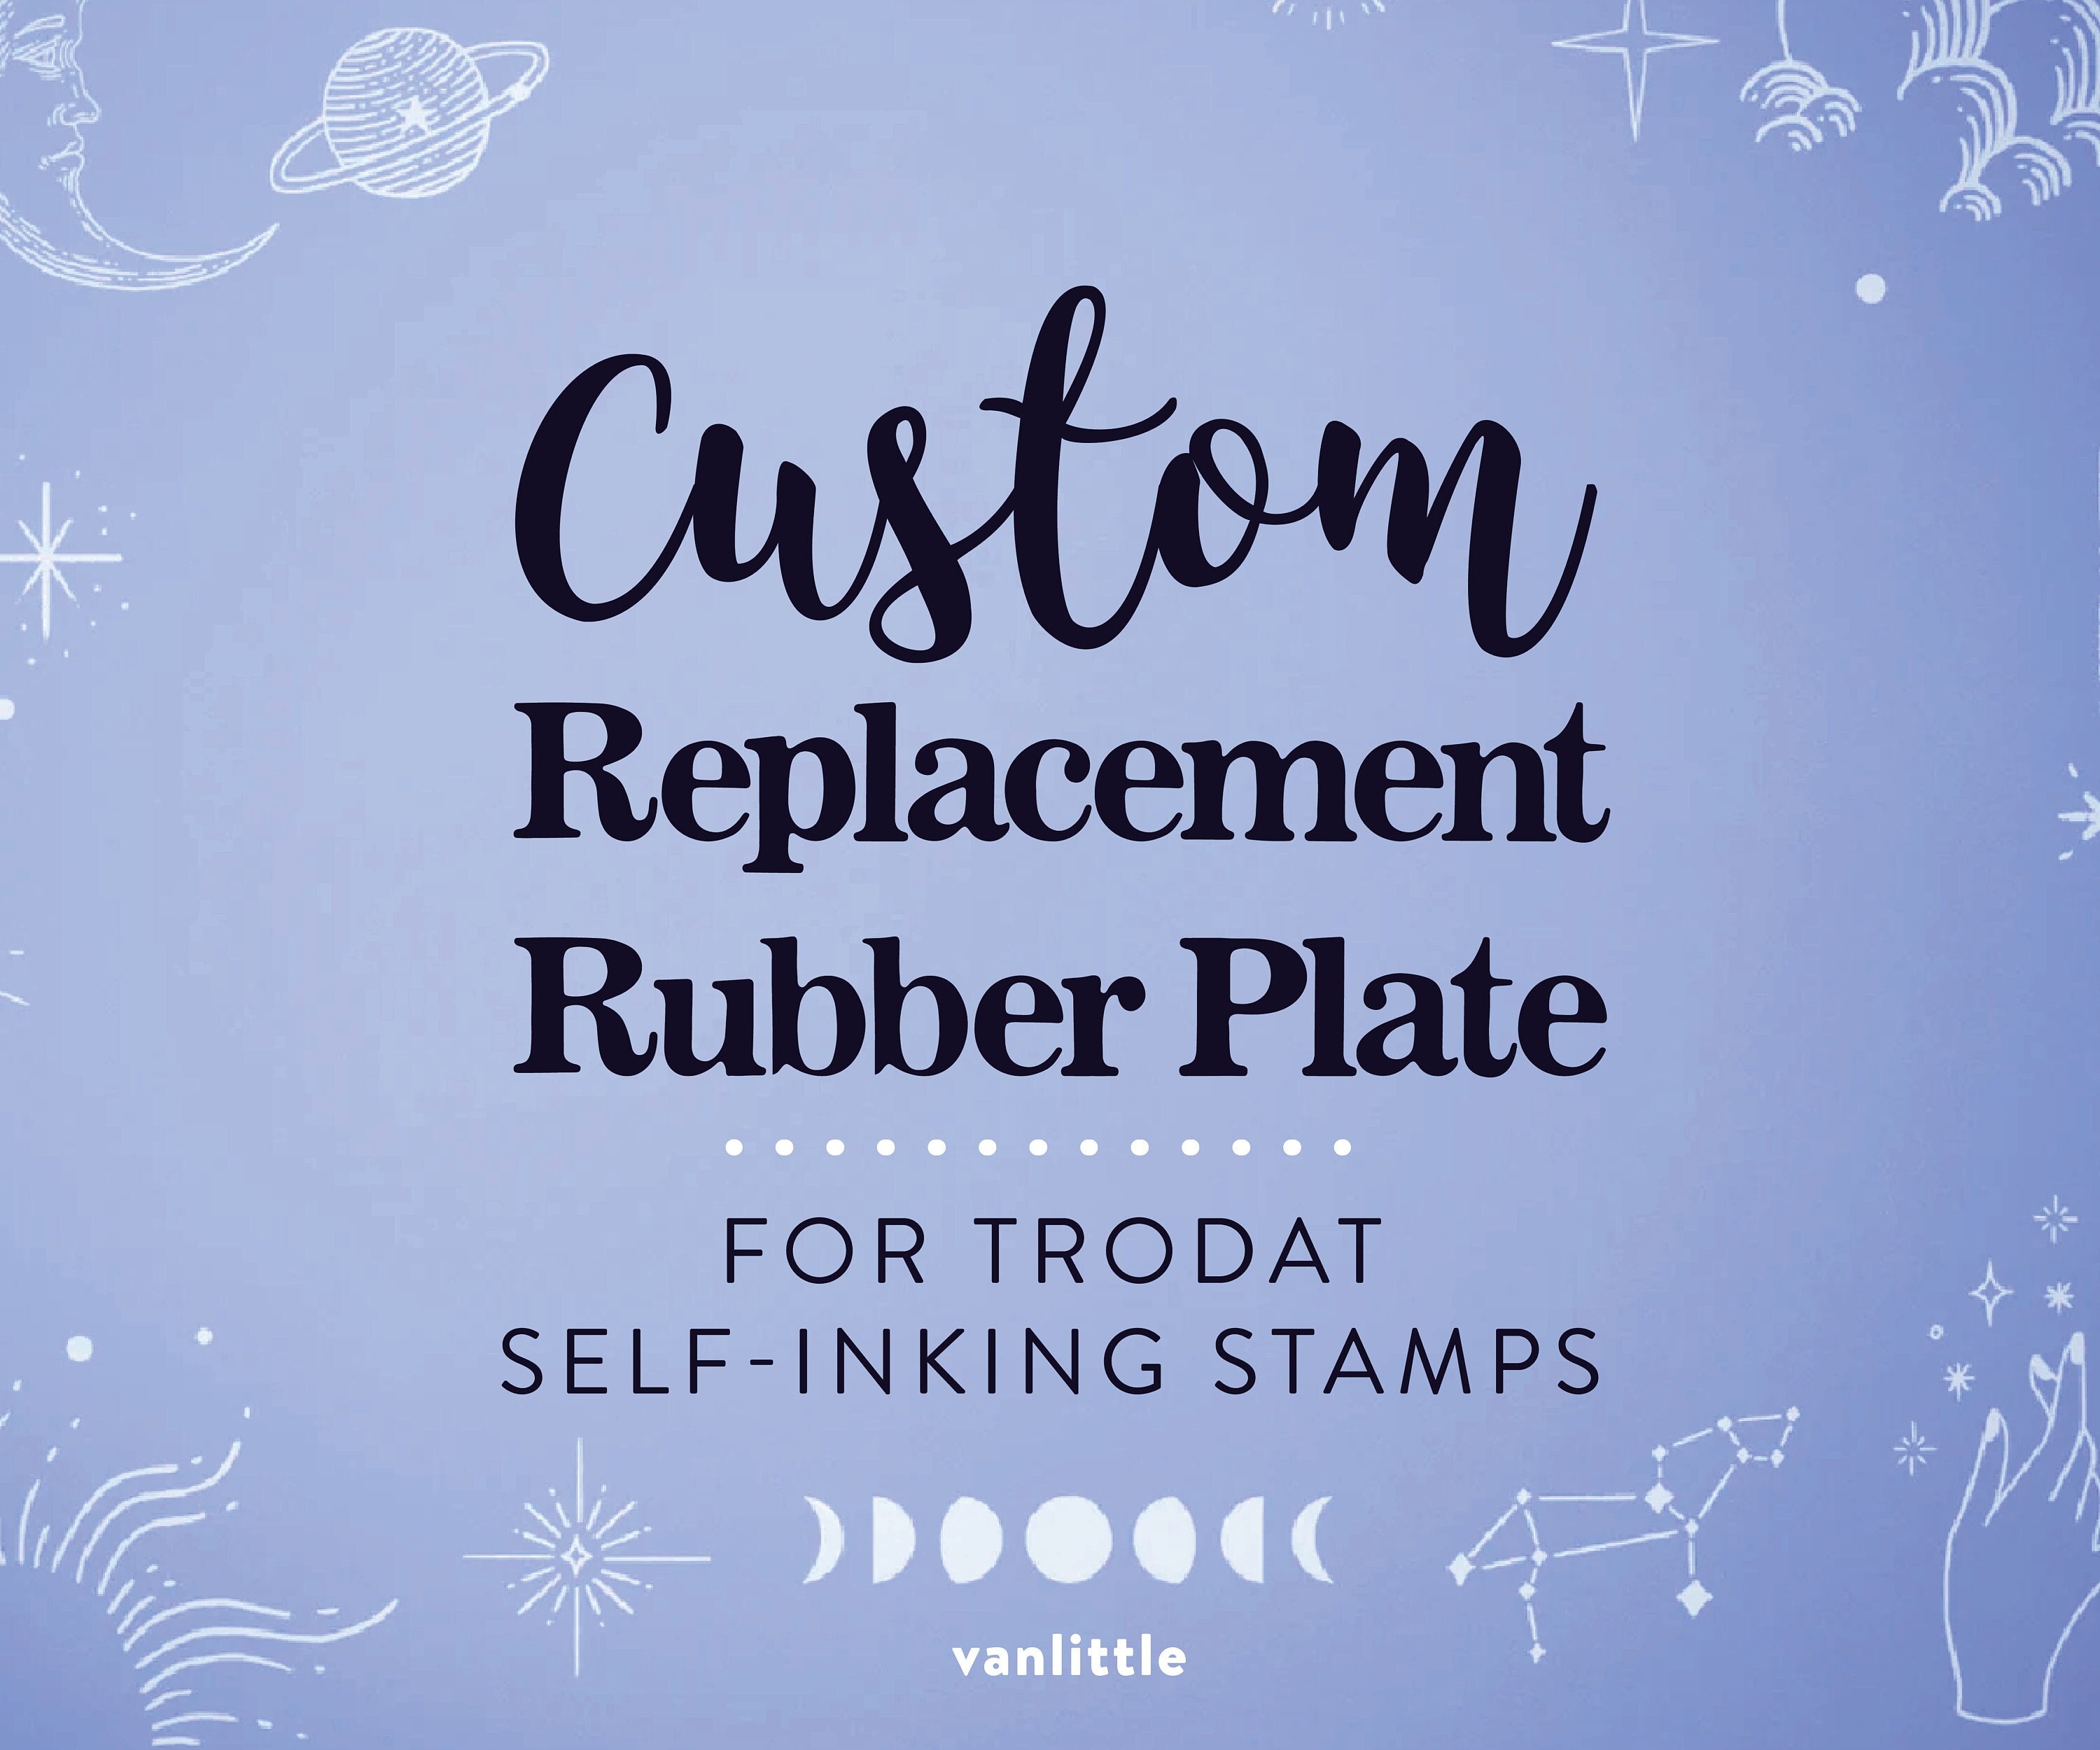 Hand Stamps - Customizable PreInked Hand Stamps by Fred Lake & Co.